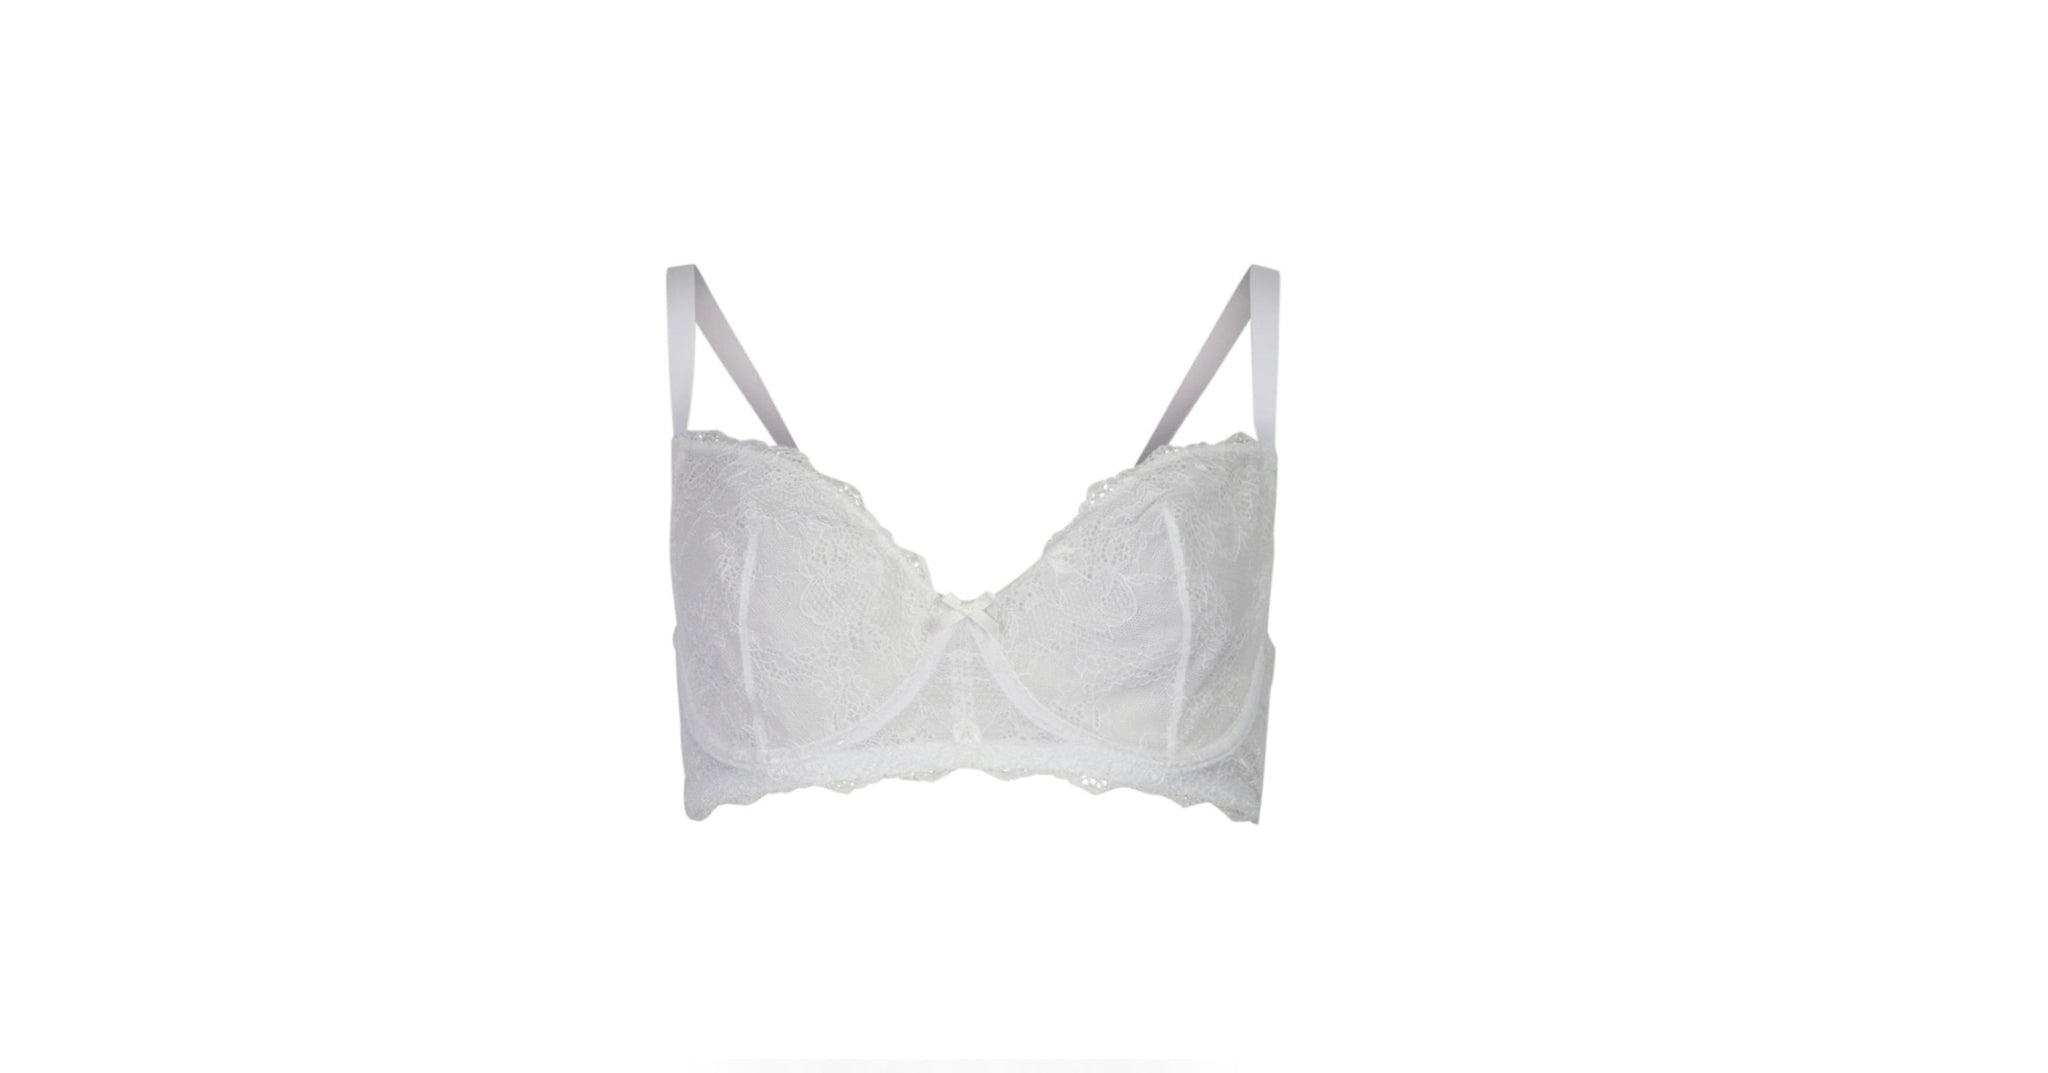 Boohoo Fuller Bust White Lace Underwire Womens Bra – Stockpoint